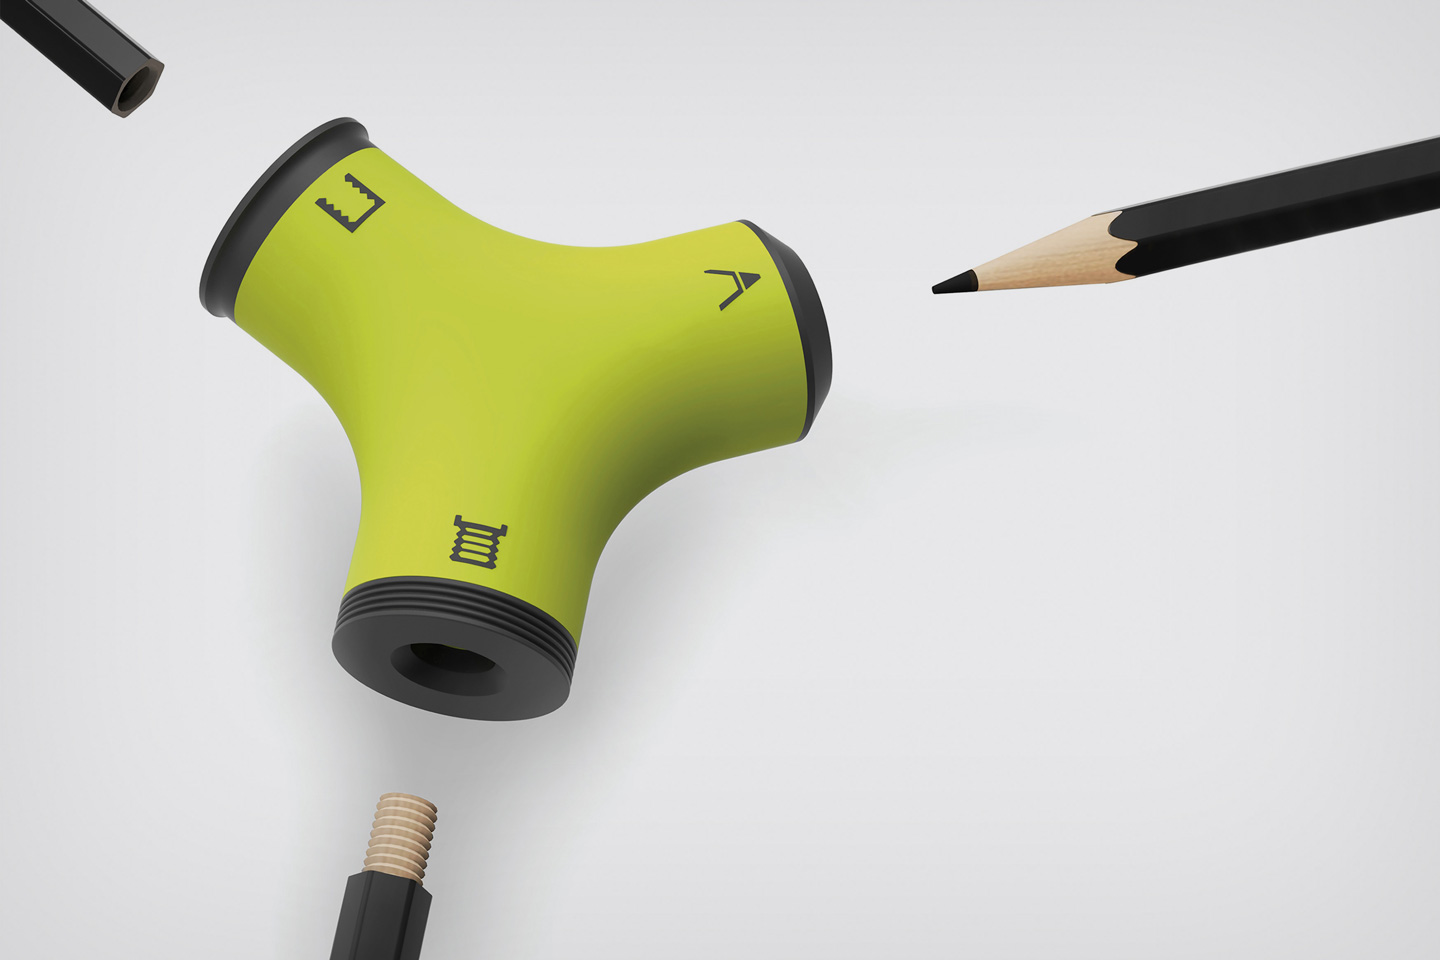 #This three-way pencil sharpener lets you connect small pencils by screwing them together